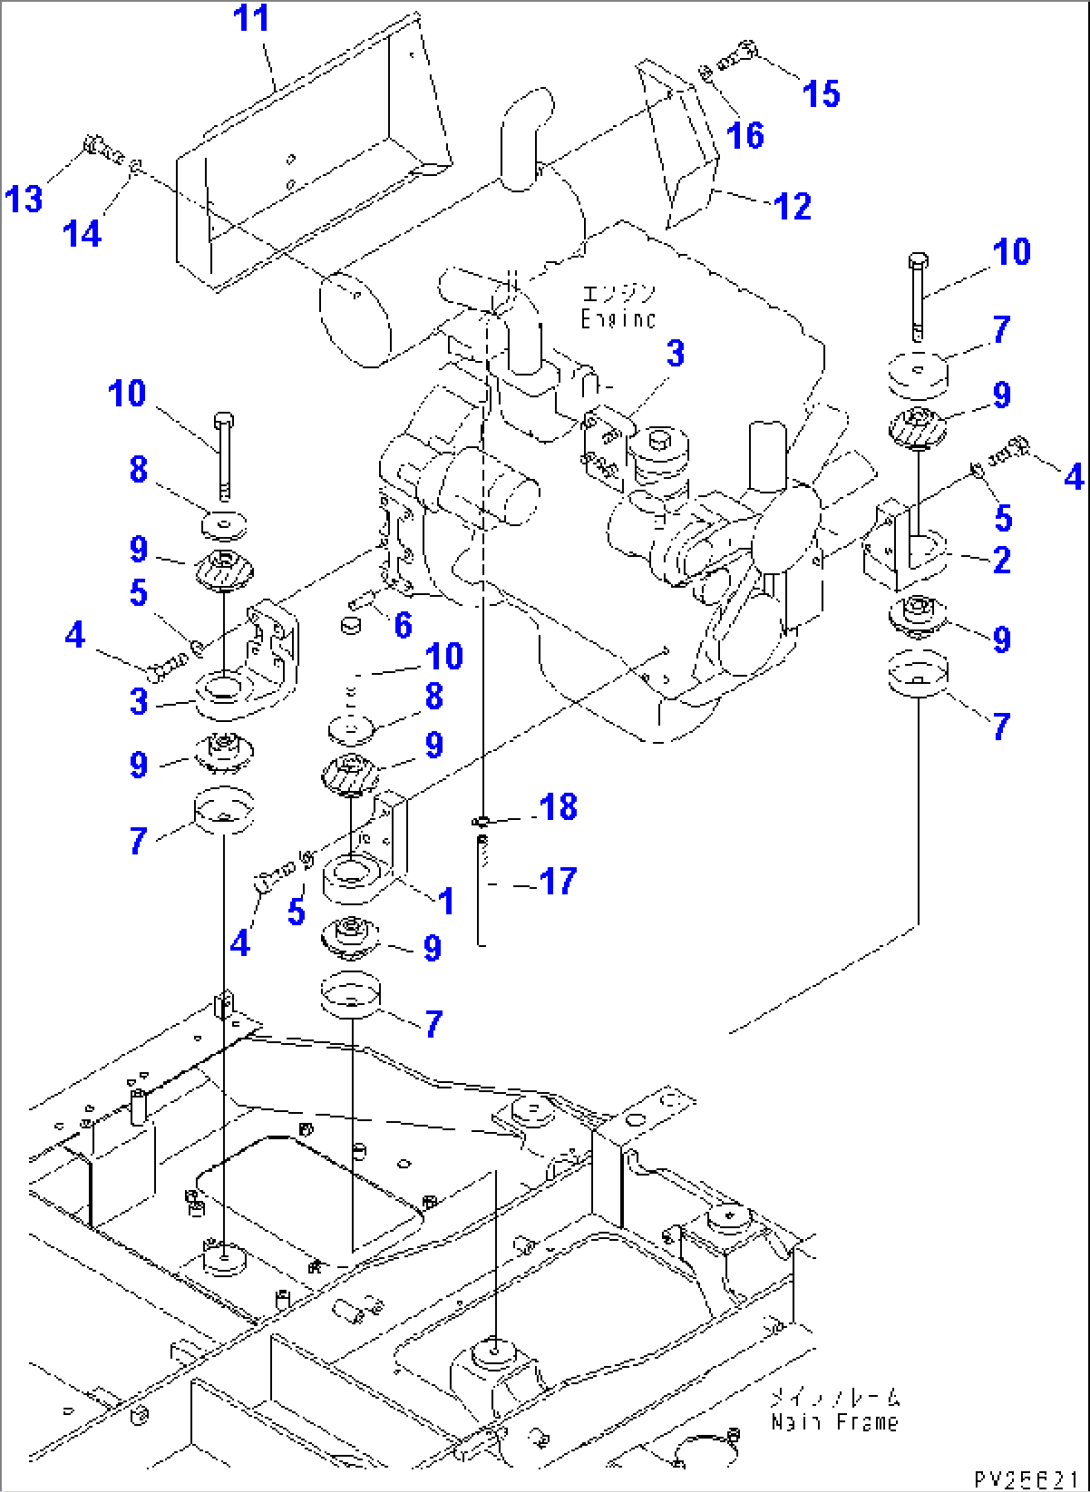 ENGINE MOUNTING PARTS(#1101-)